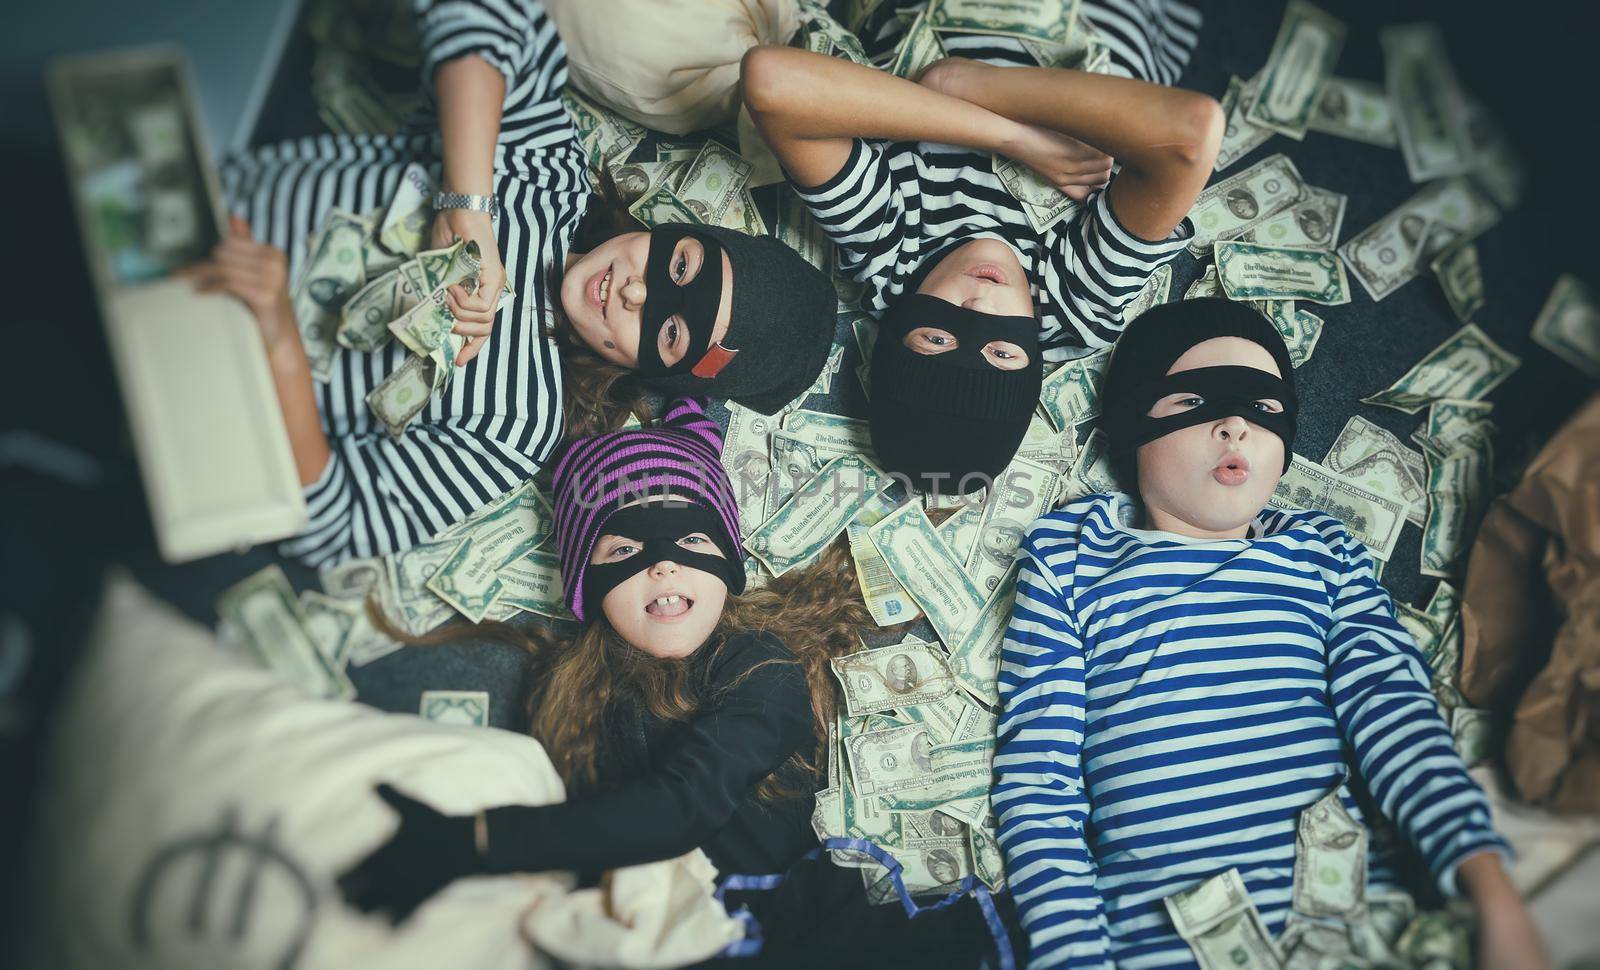 photosession of children in the image of a Bank robber